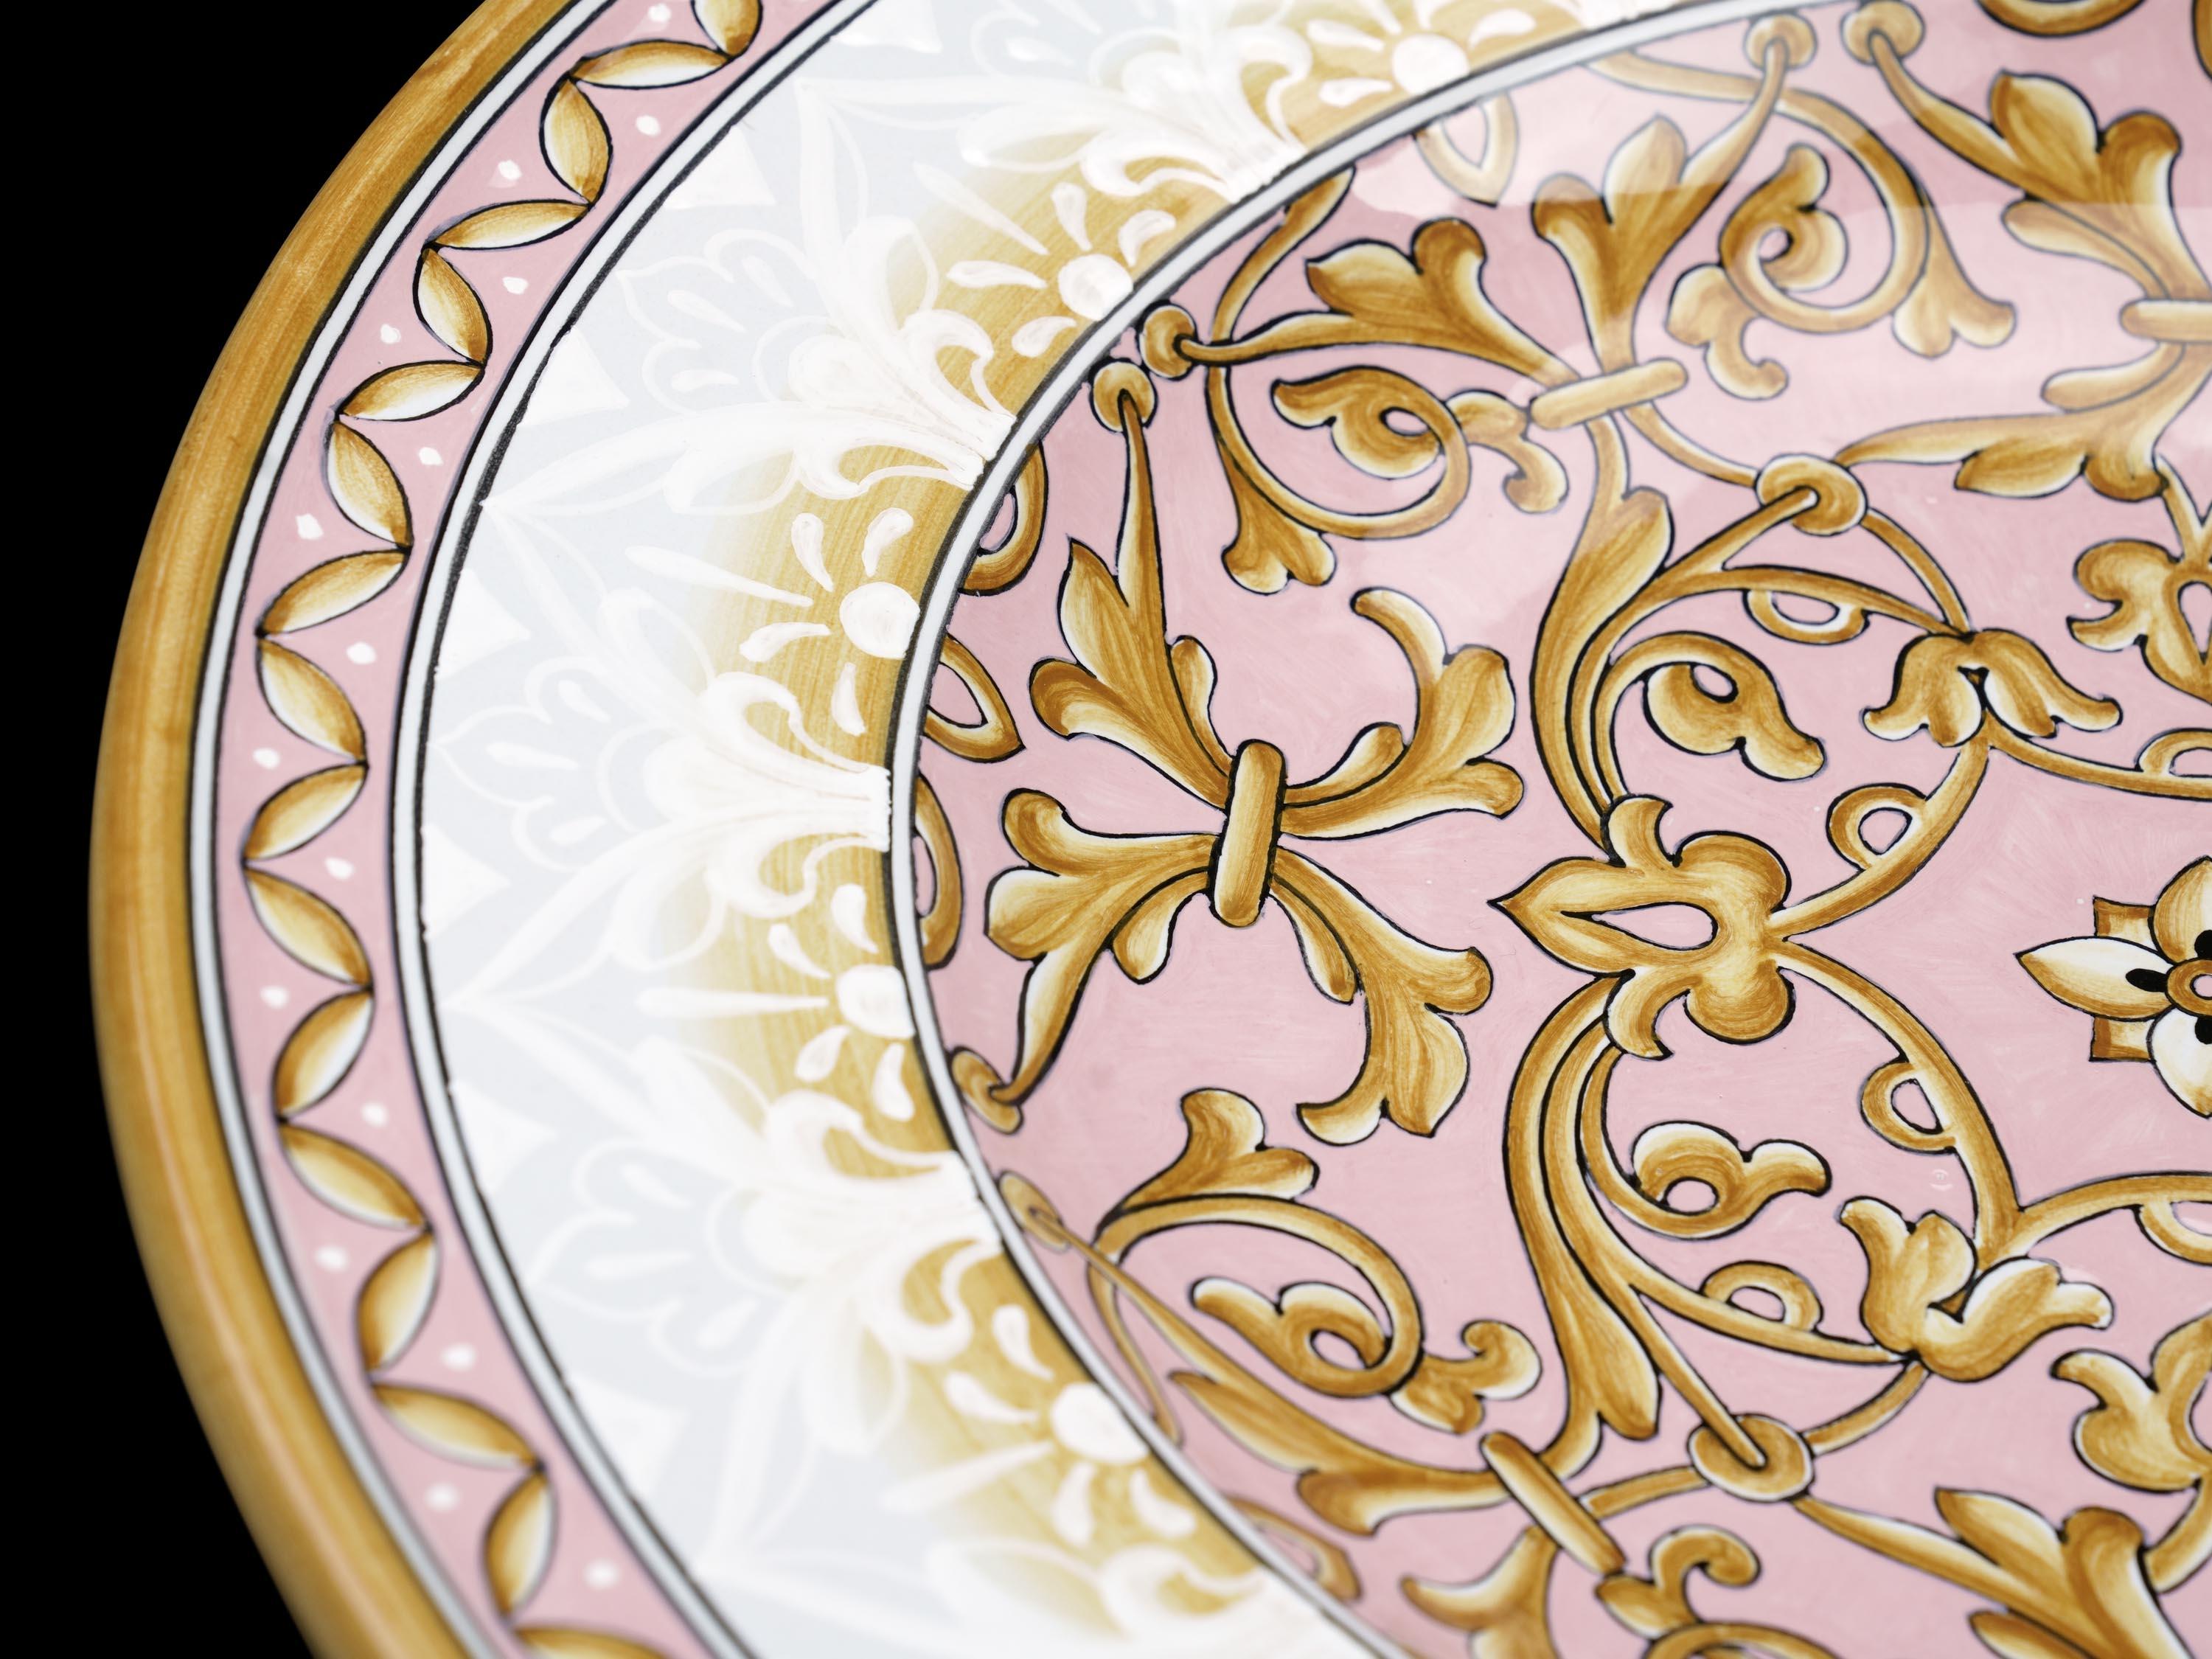 Contemporary Large Ceramic Plate, Decorative Majolica Bowl Centerpiece, Pink White, In Stock For Sale